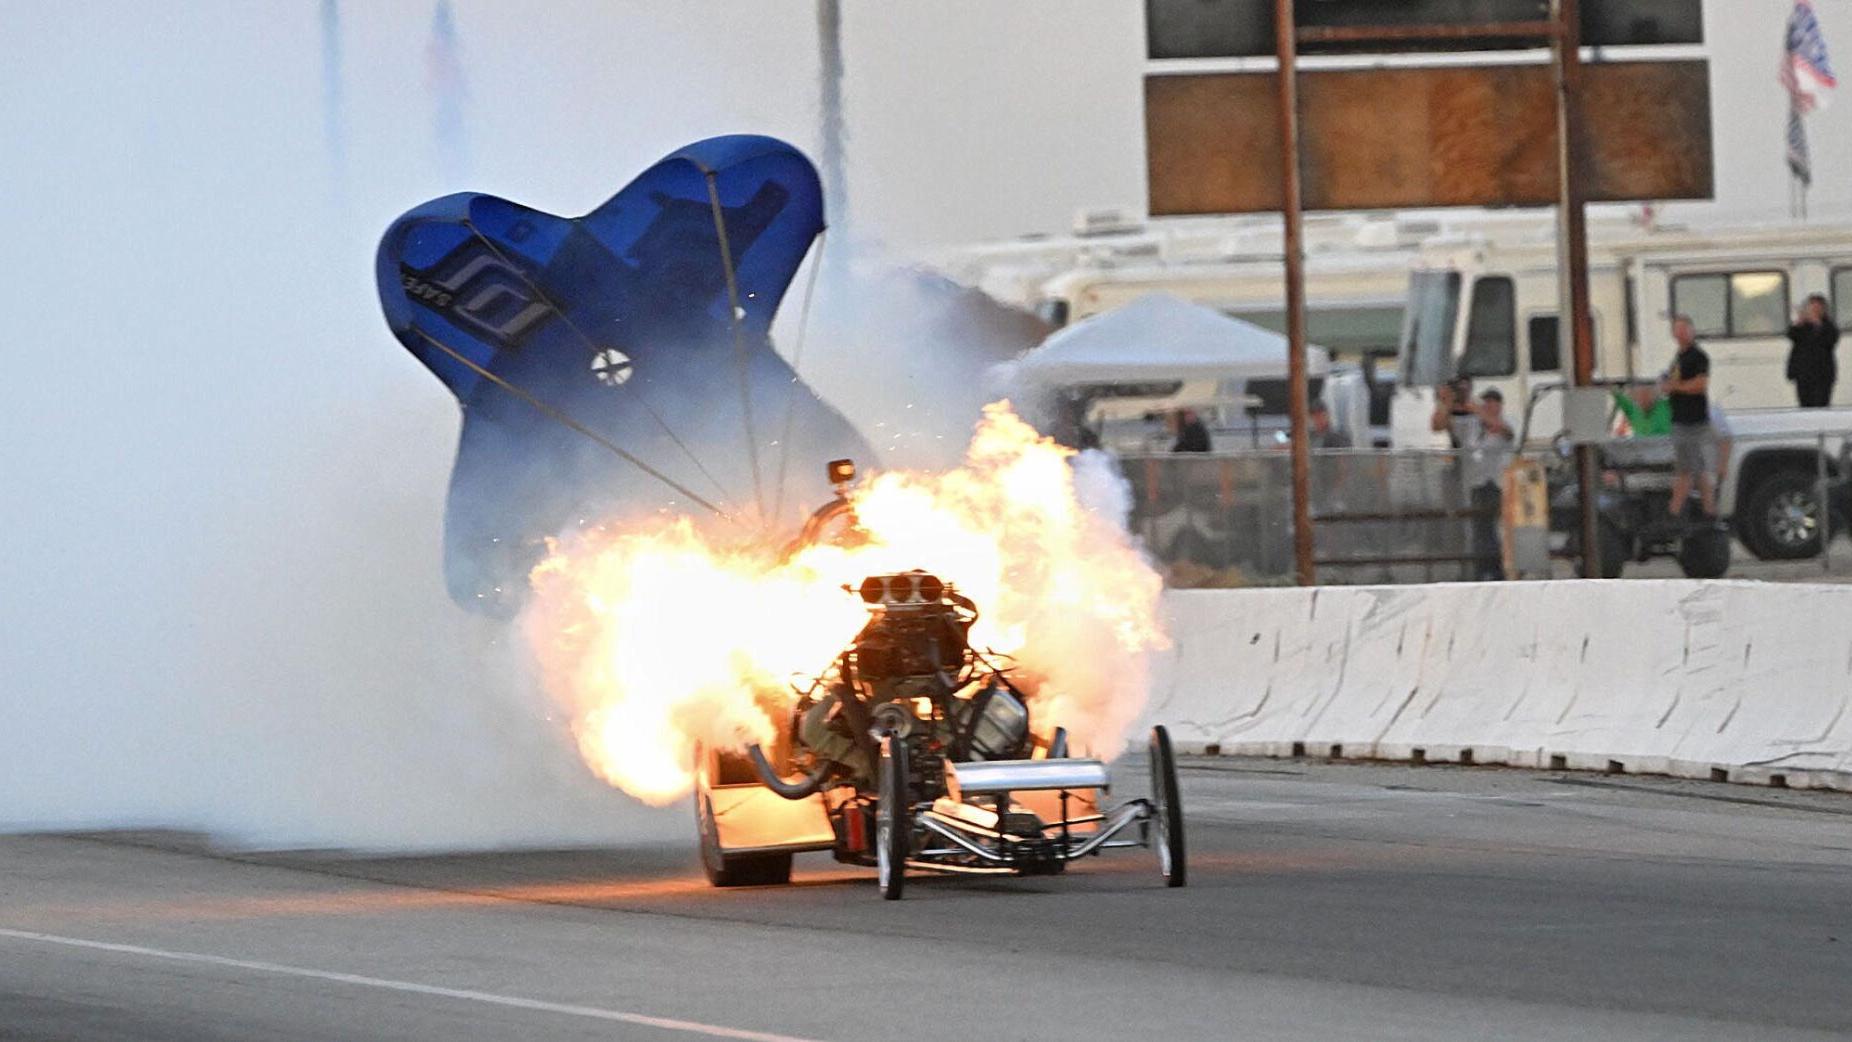 Tyler Hilton drove to victory, left with Hot Rod Heritage championship at  30th NHRA California Hot Rod Reunion | Sports 